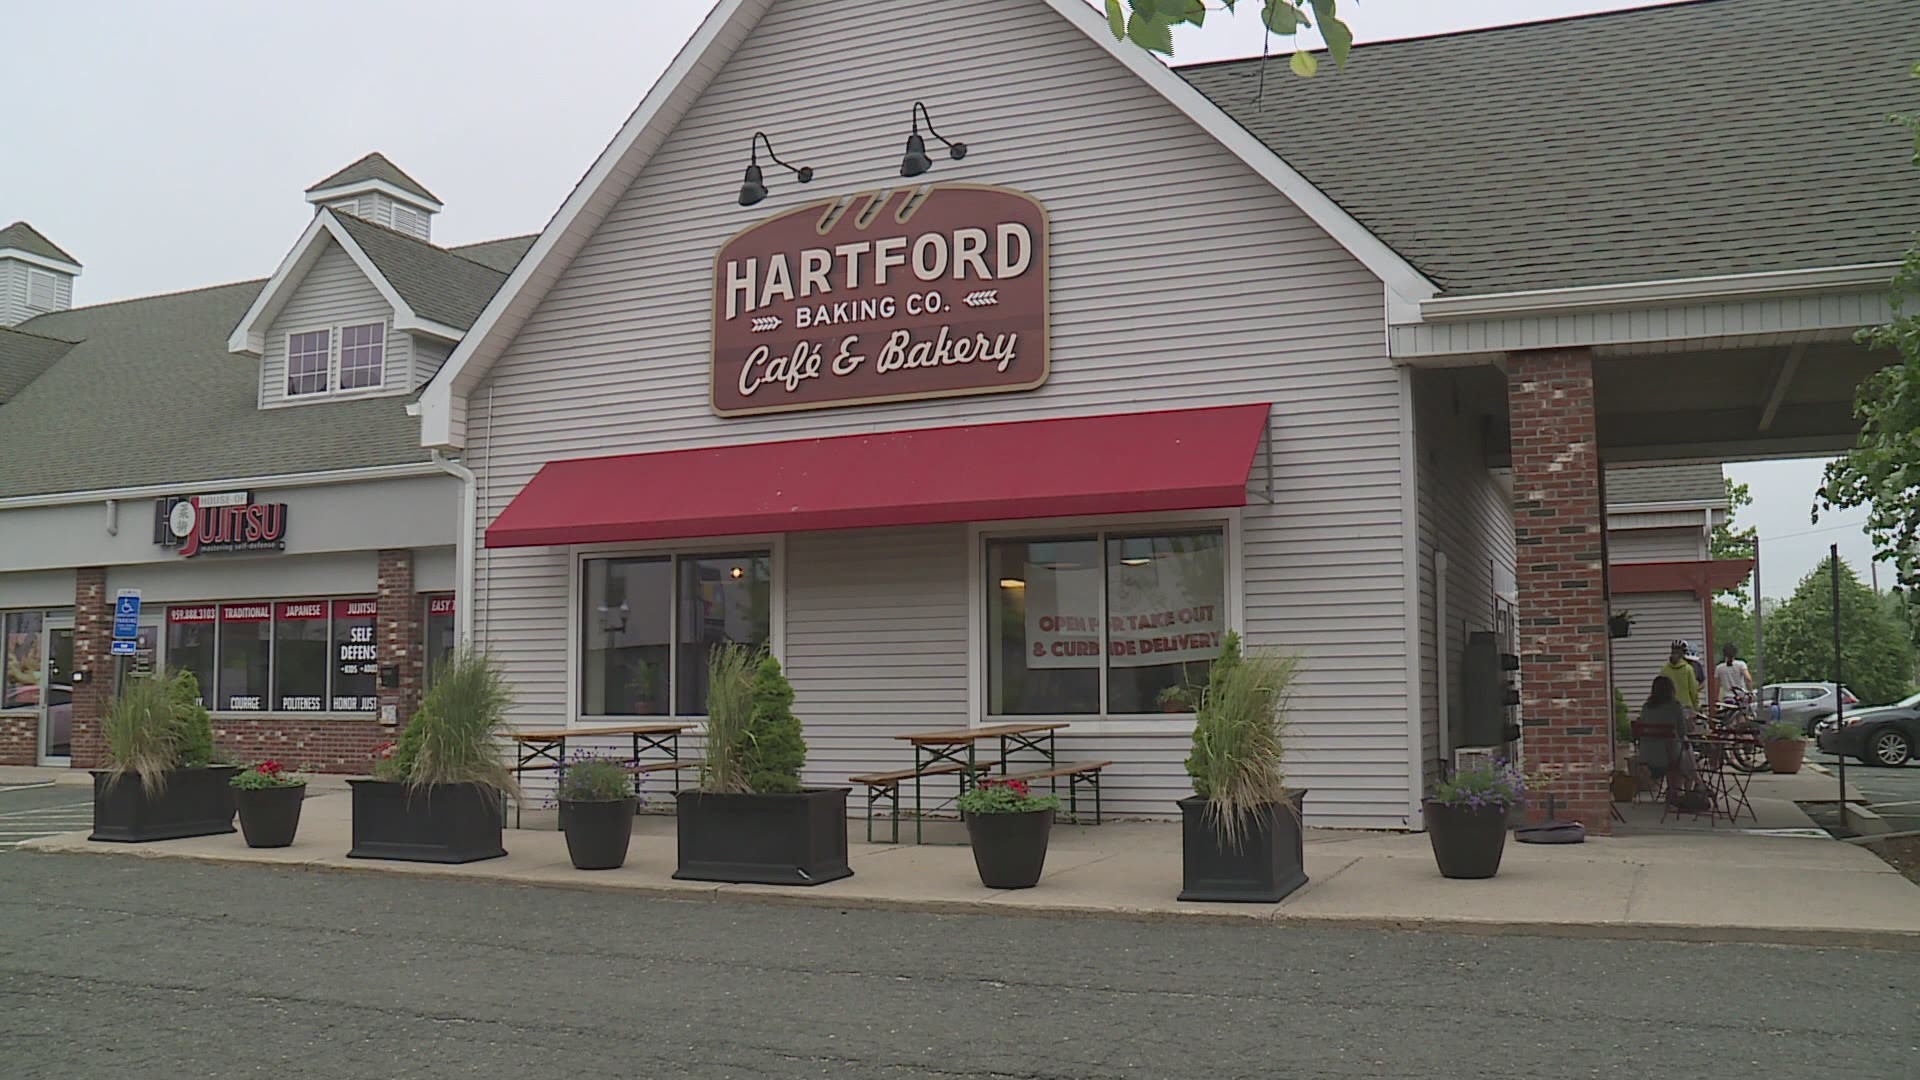 Fortunately, the West Hartford Center location did not lose power and has been open for business for customers to get coffee and charge their devices.